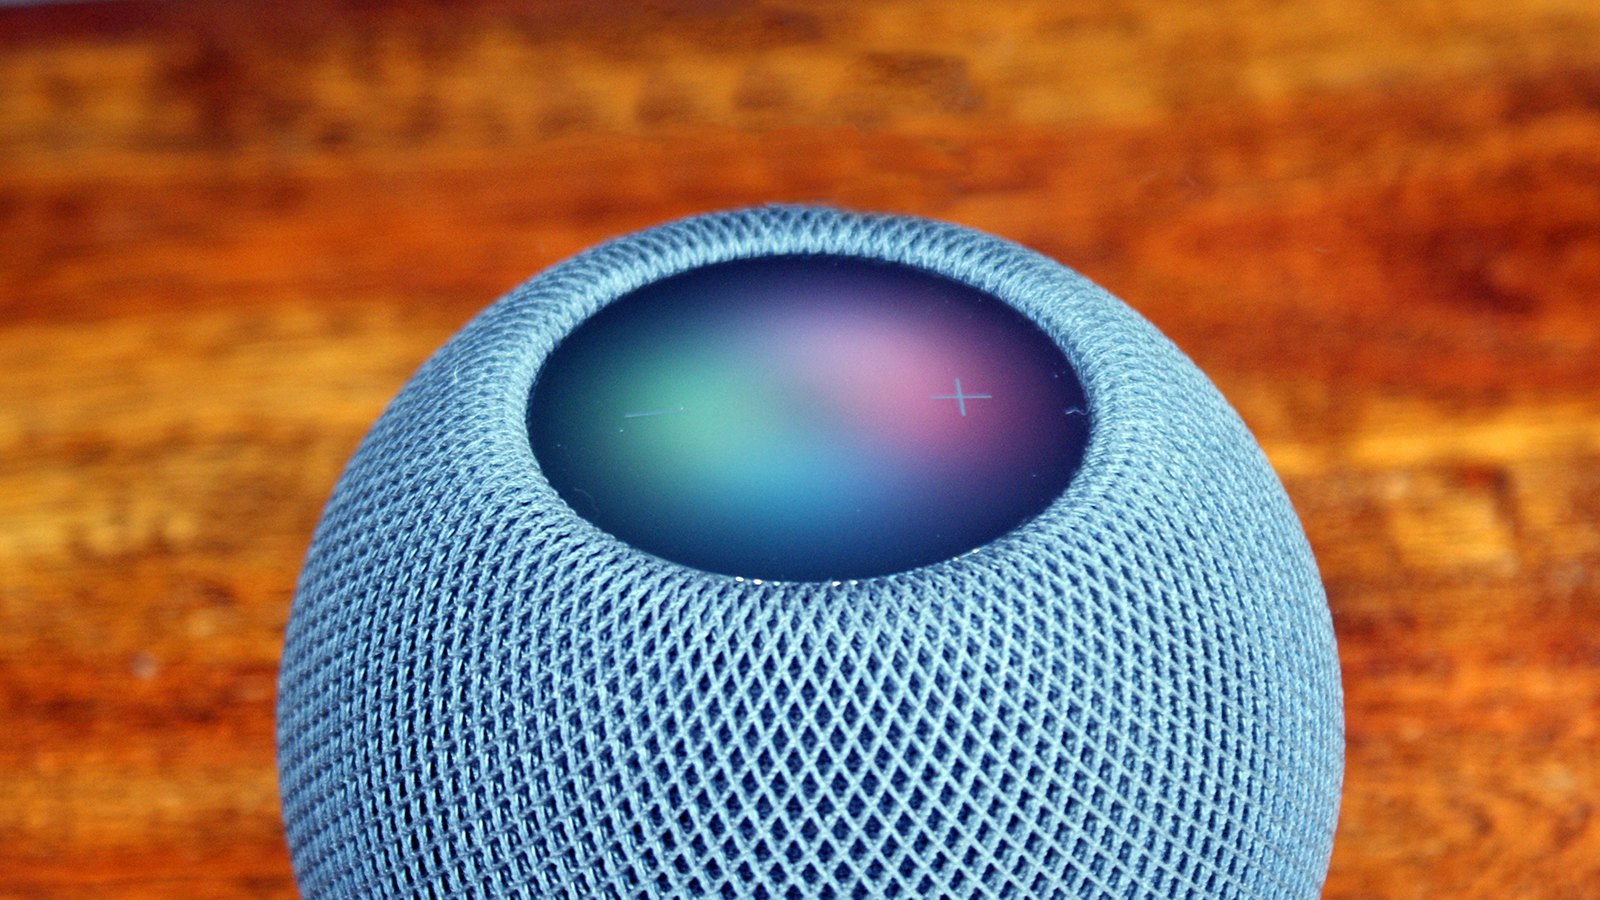 Apple HomePod leak suggests a full touchscreen display model is coming, but all I want is next-gen Siri